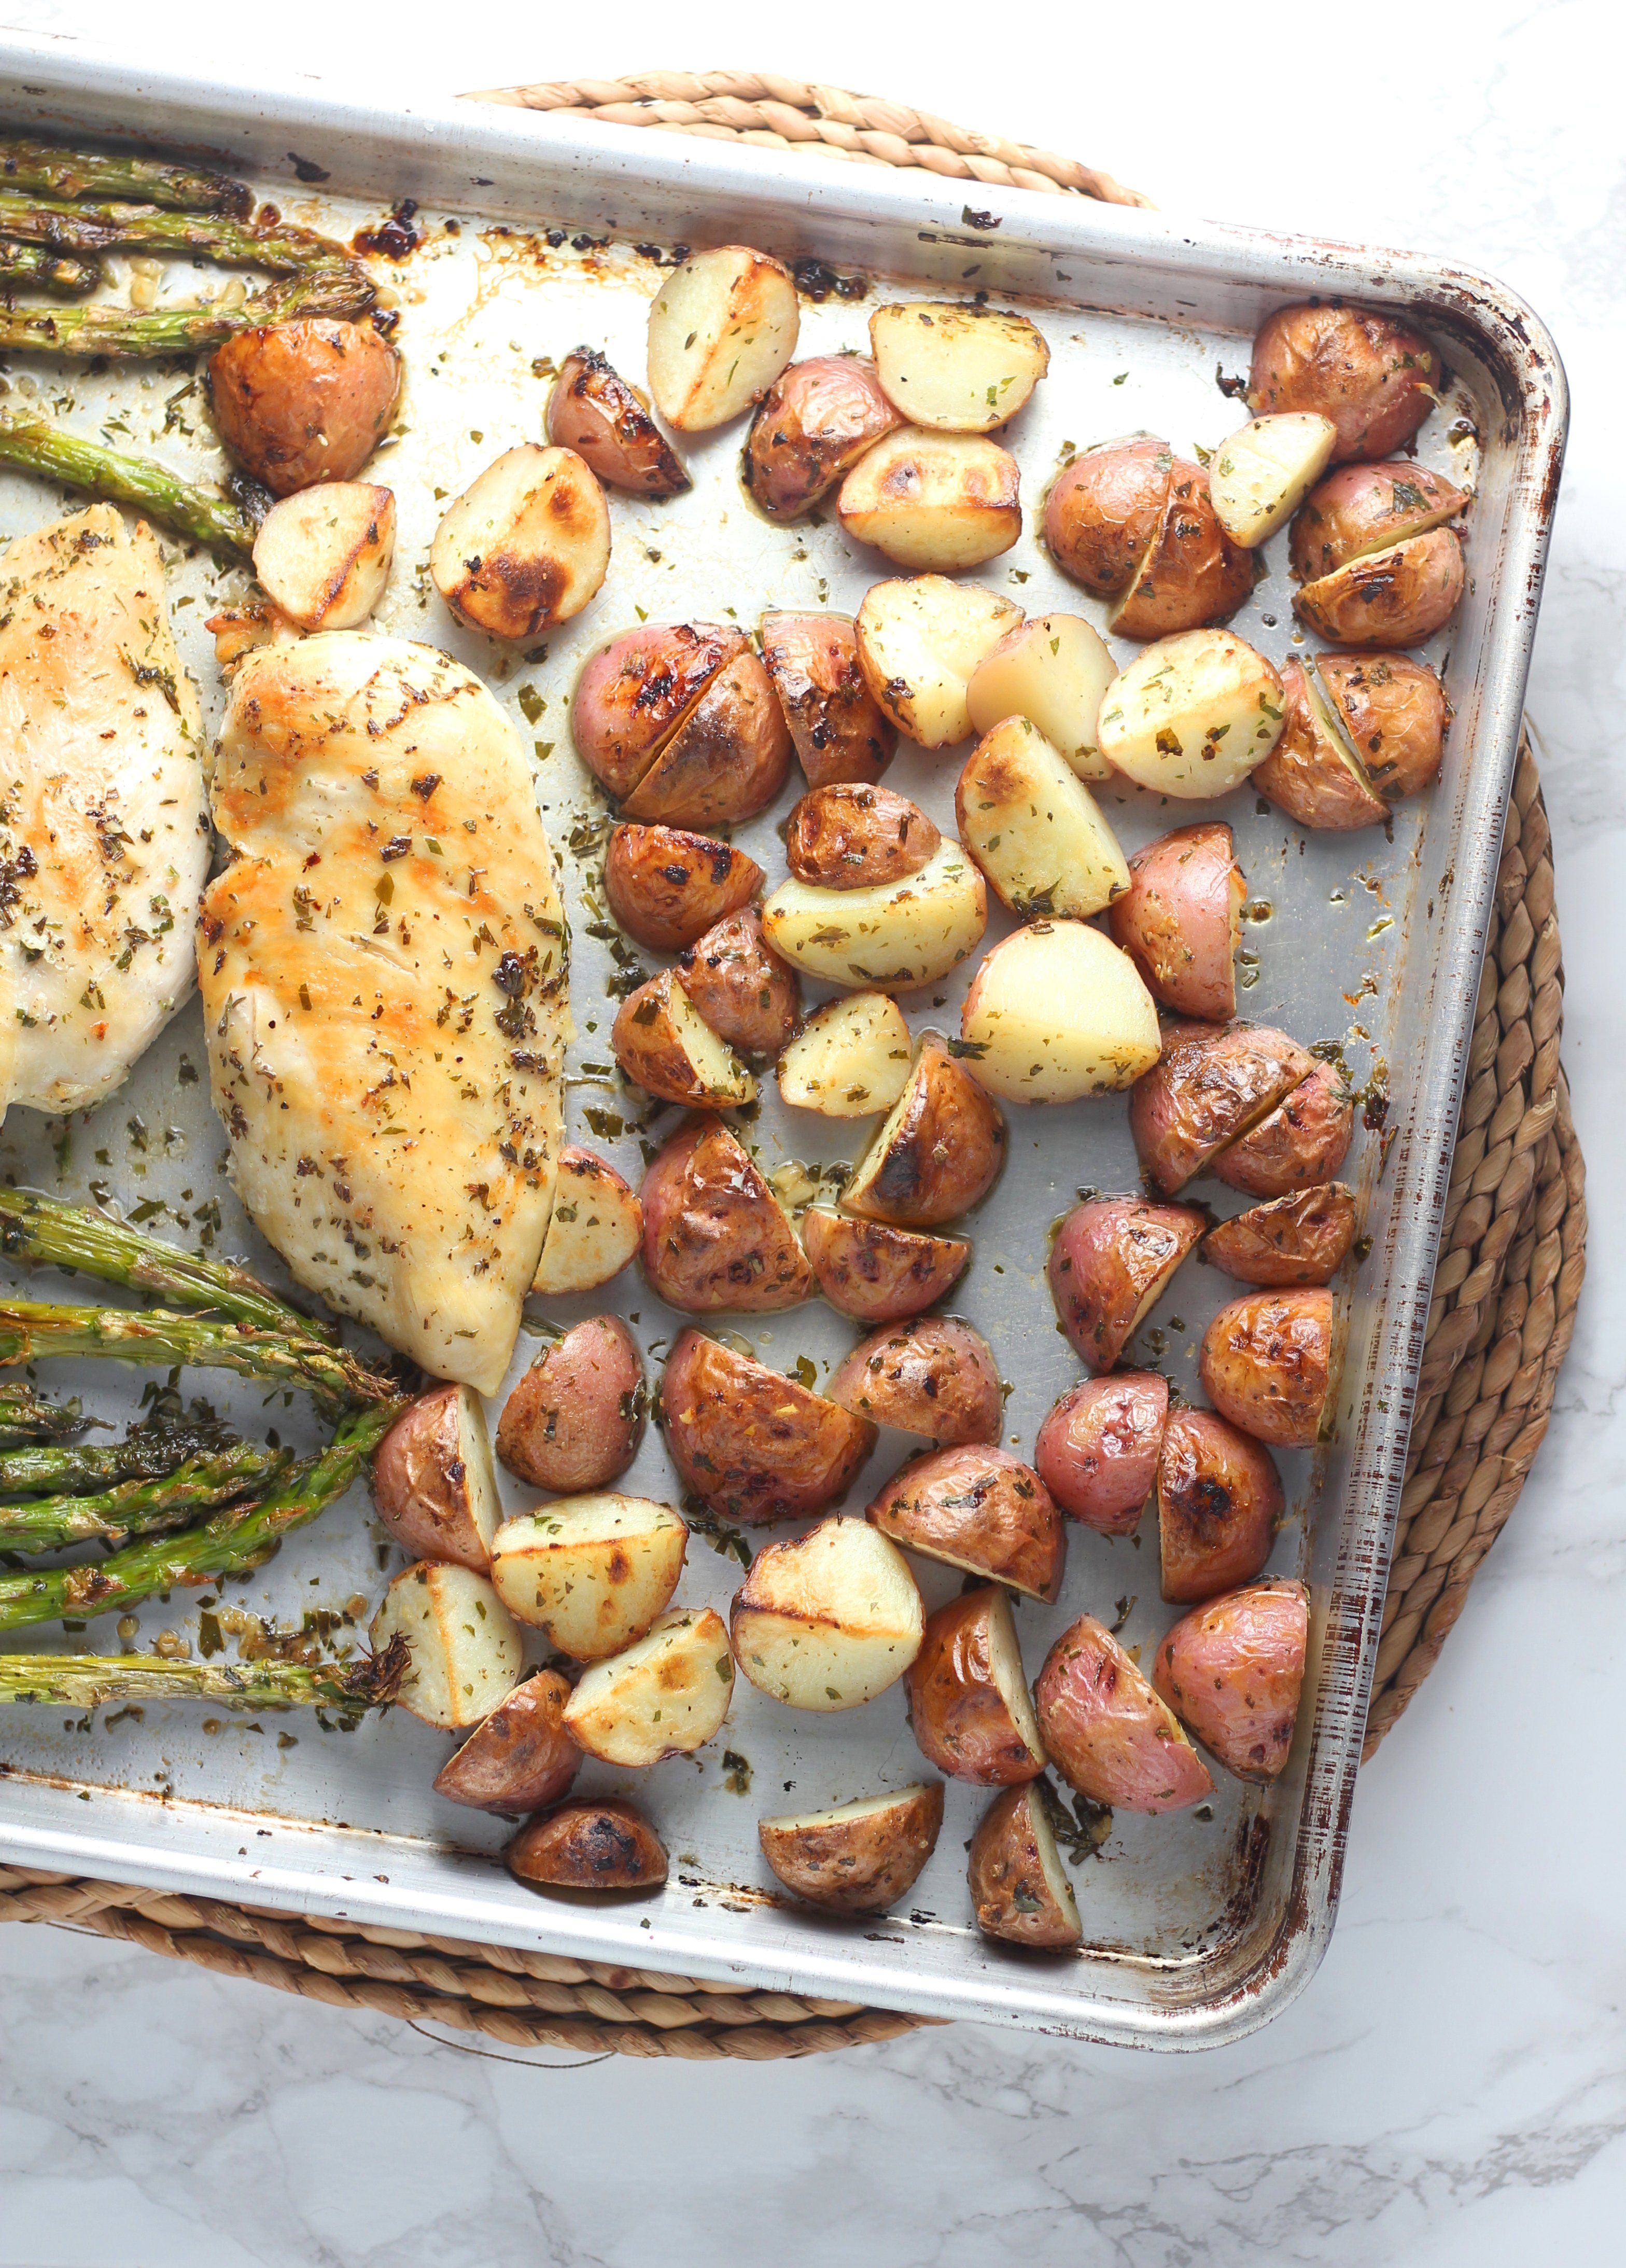 This quick and easy One-Pan Garlic Herb Butter Chicken with Potatoes and Asparagus makes a complete, satisfying dinner that’s perfect for busy weeknights!